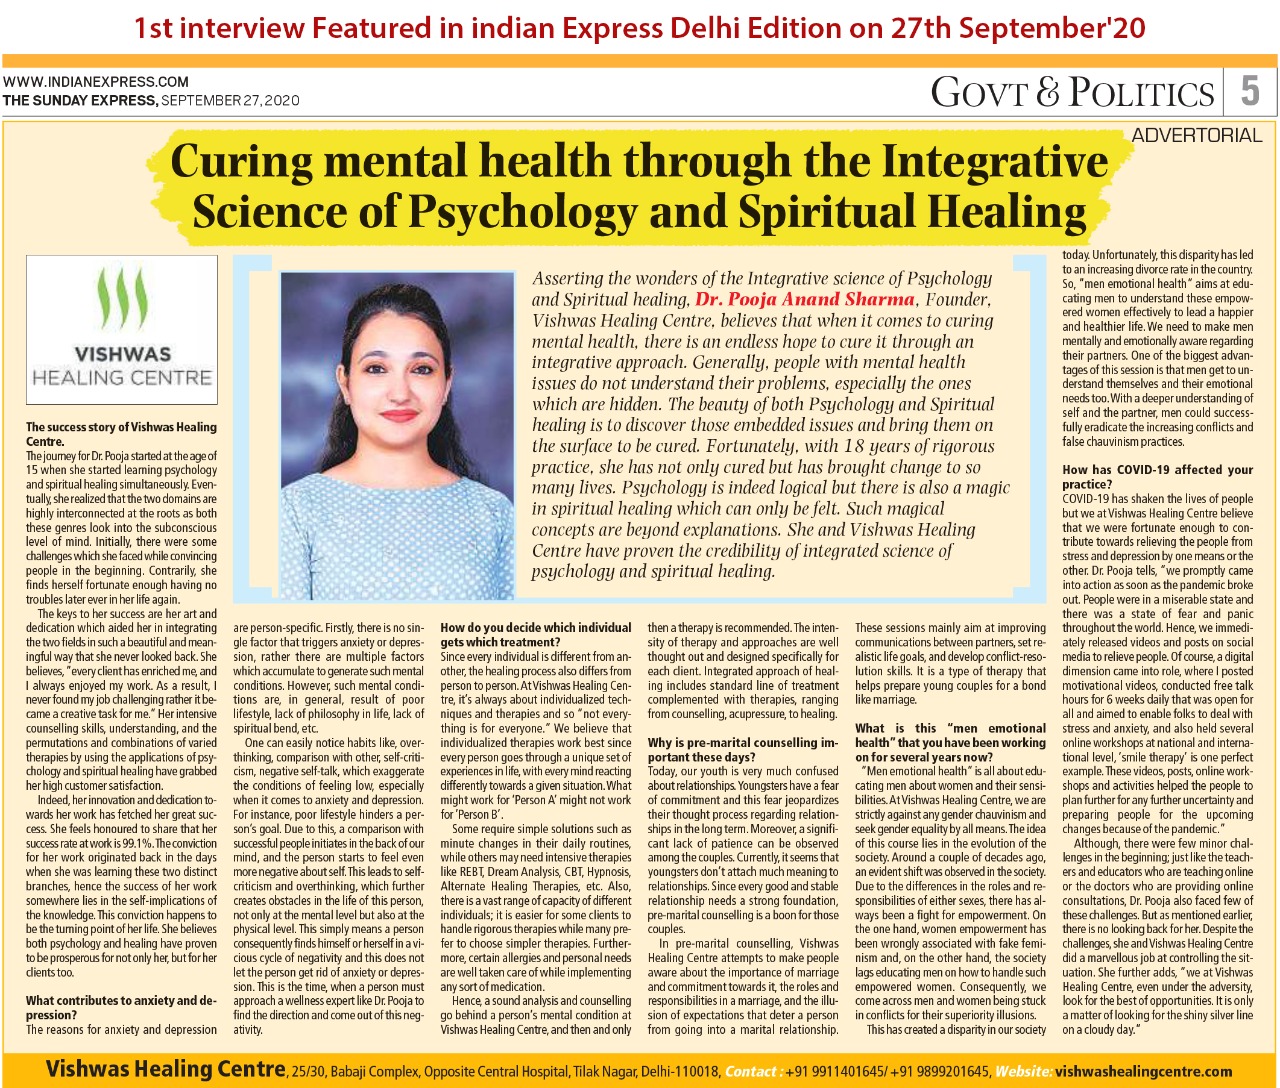 Dr Pooja Anand Sharma 1st interview featured in Indian Express